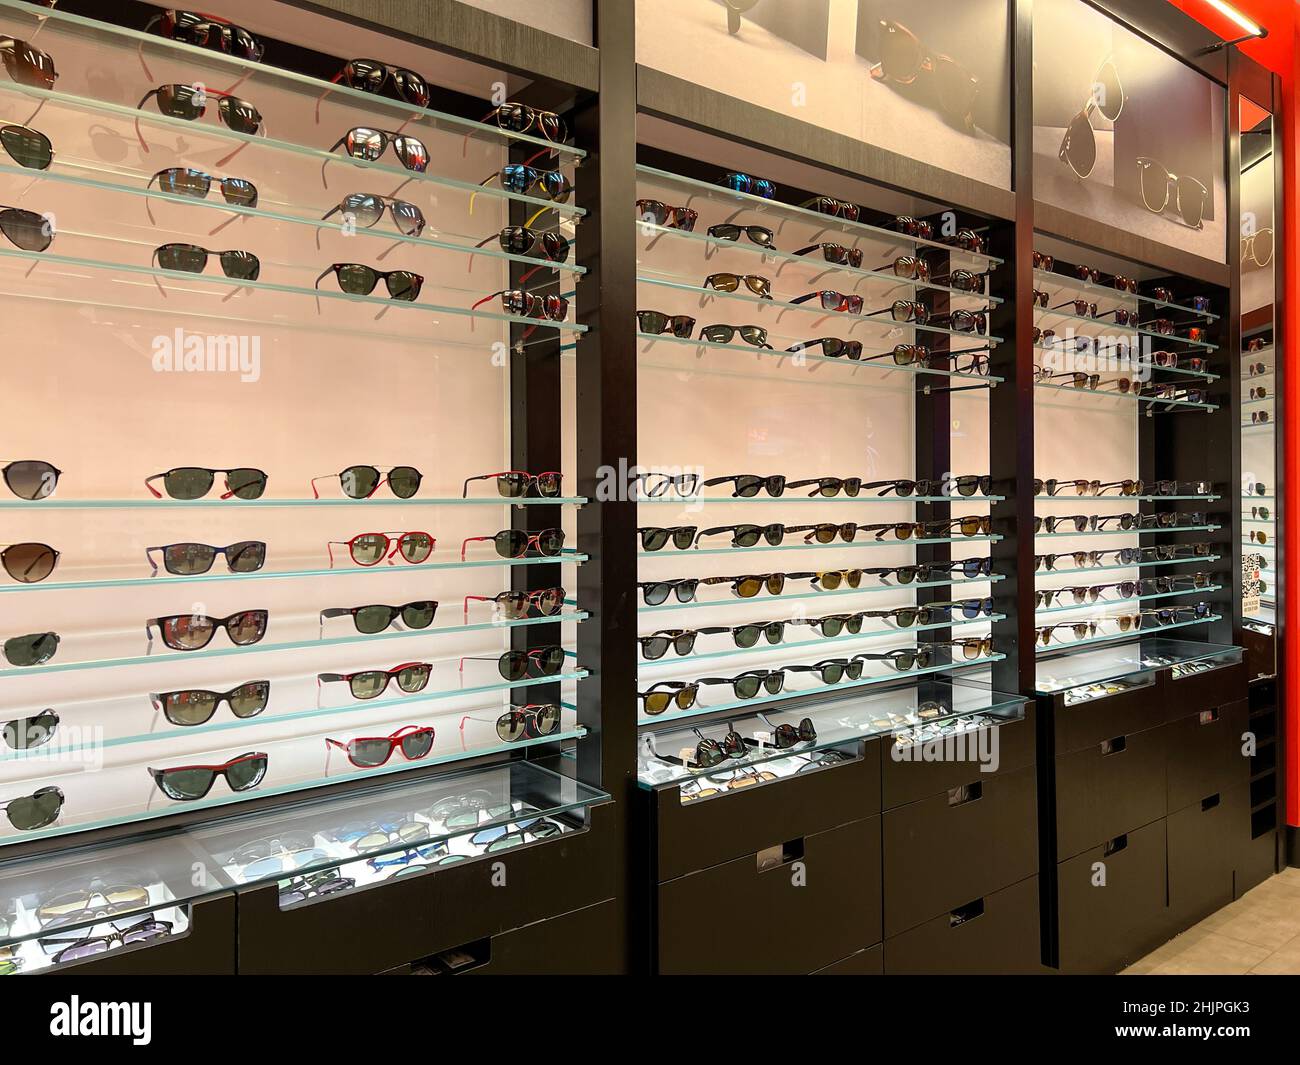 Ray ban store High Resolution Stock Photography and Images - Alamy